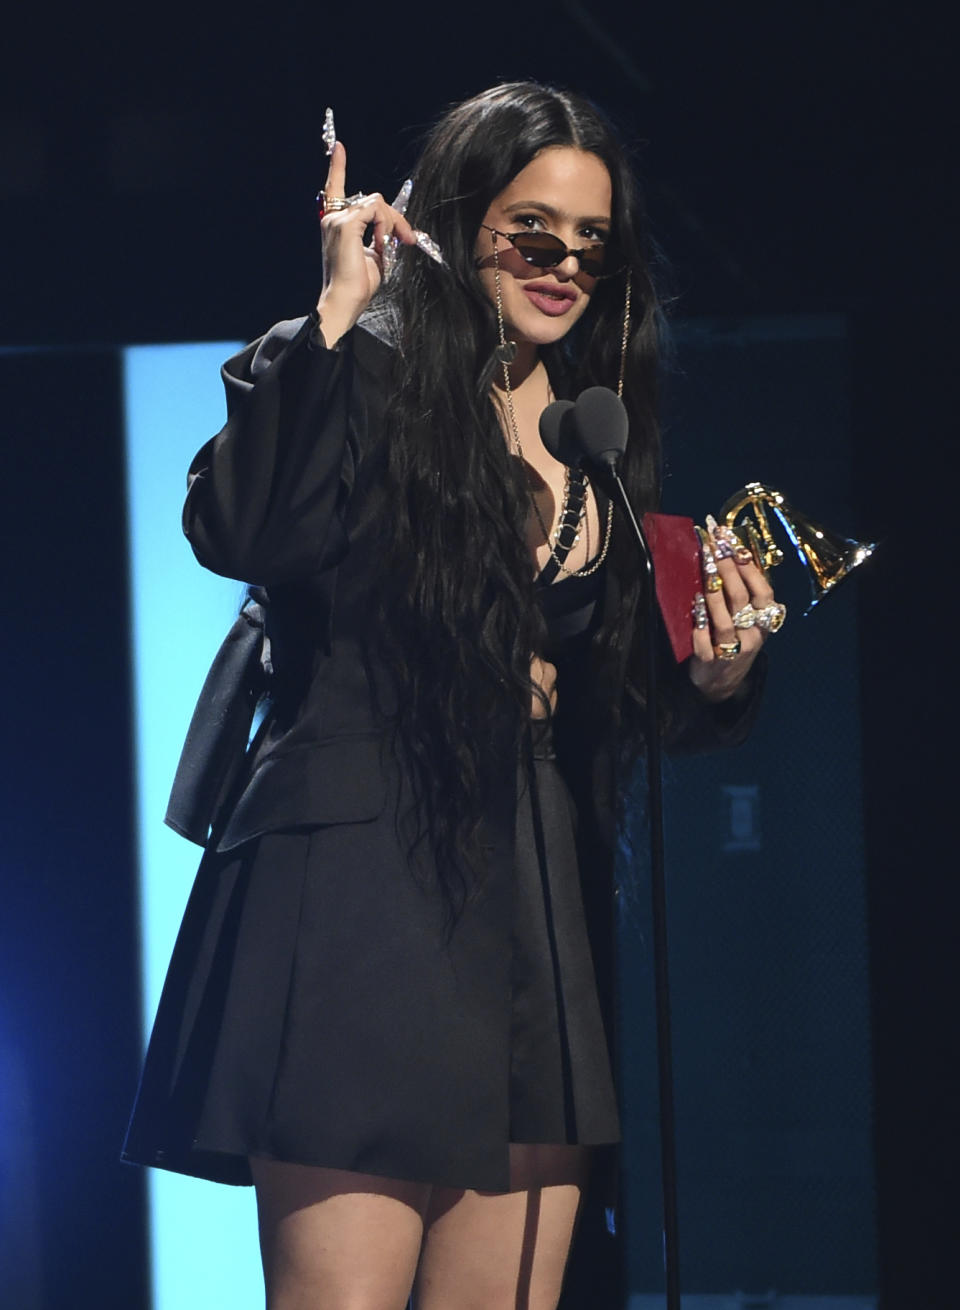 Rosalia accepts the award for album of the year for "El Mal Querer" at the 20th Latin Grammy Awards on Thursday, Nov. 14, 2019, at the MGM Grand Garden Arena in Las Vegas. (AP Photo/Chris Pizzello)